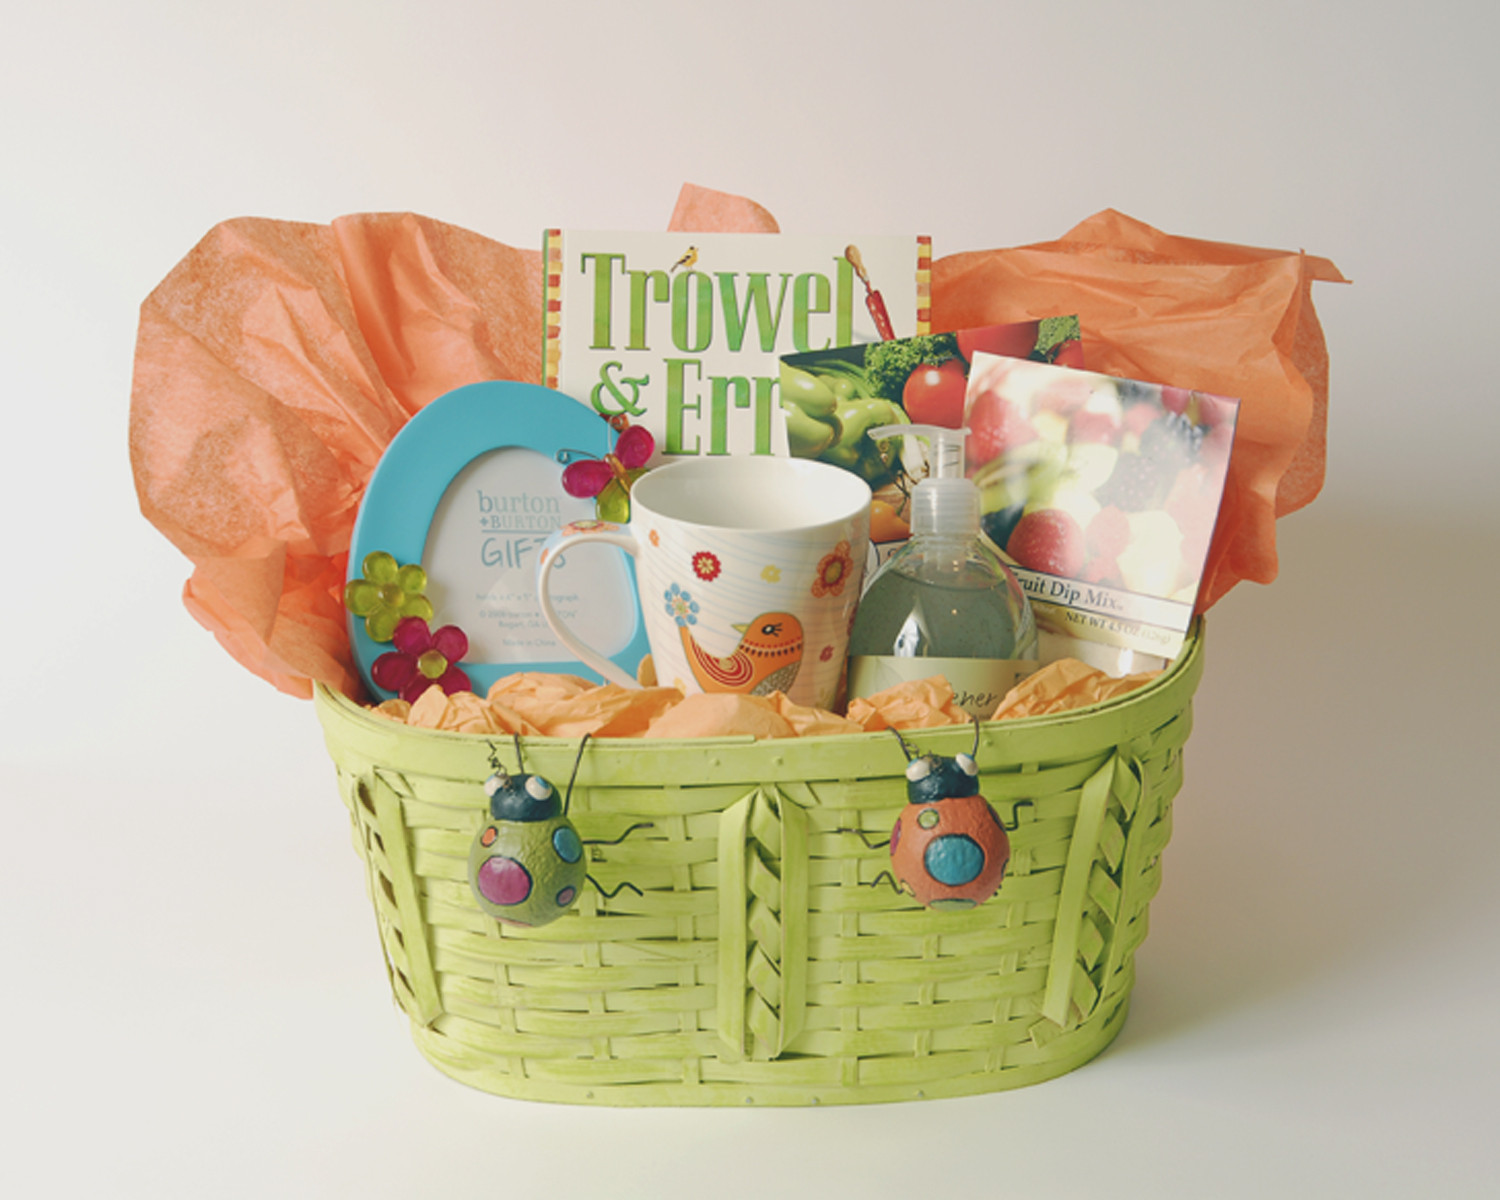 Outdoor Gift Basket Ideas
 Thoughtful Presence 5 Great Gift Basket Ideas For Women